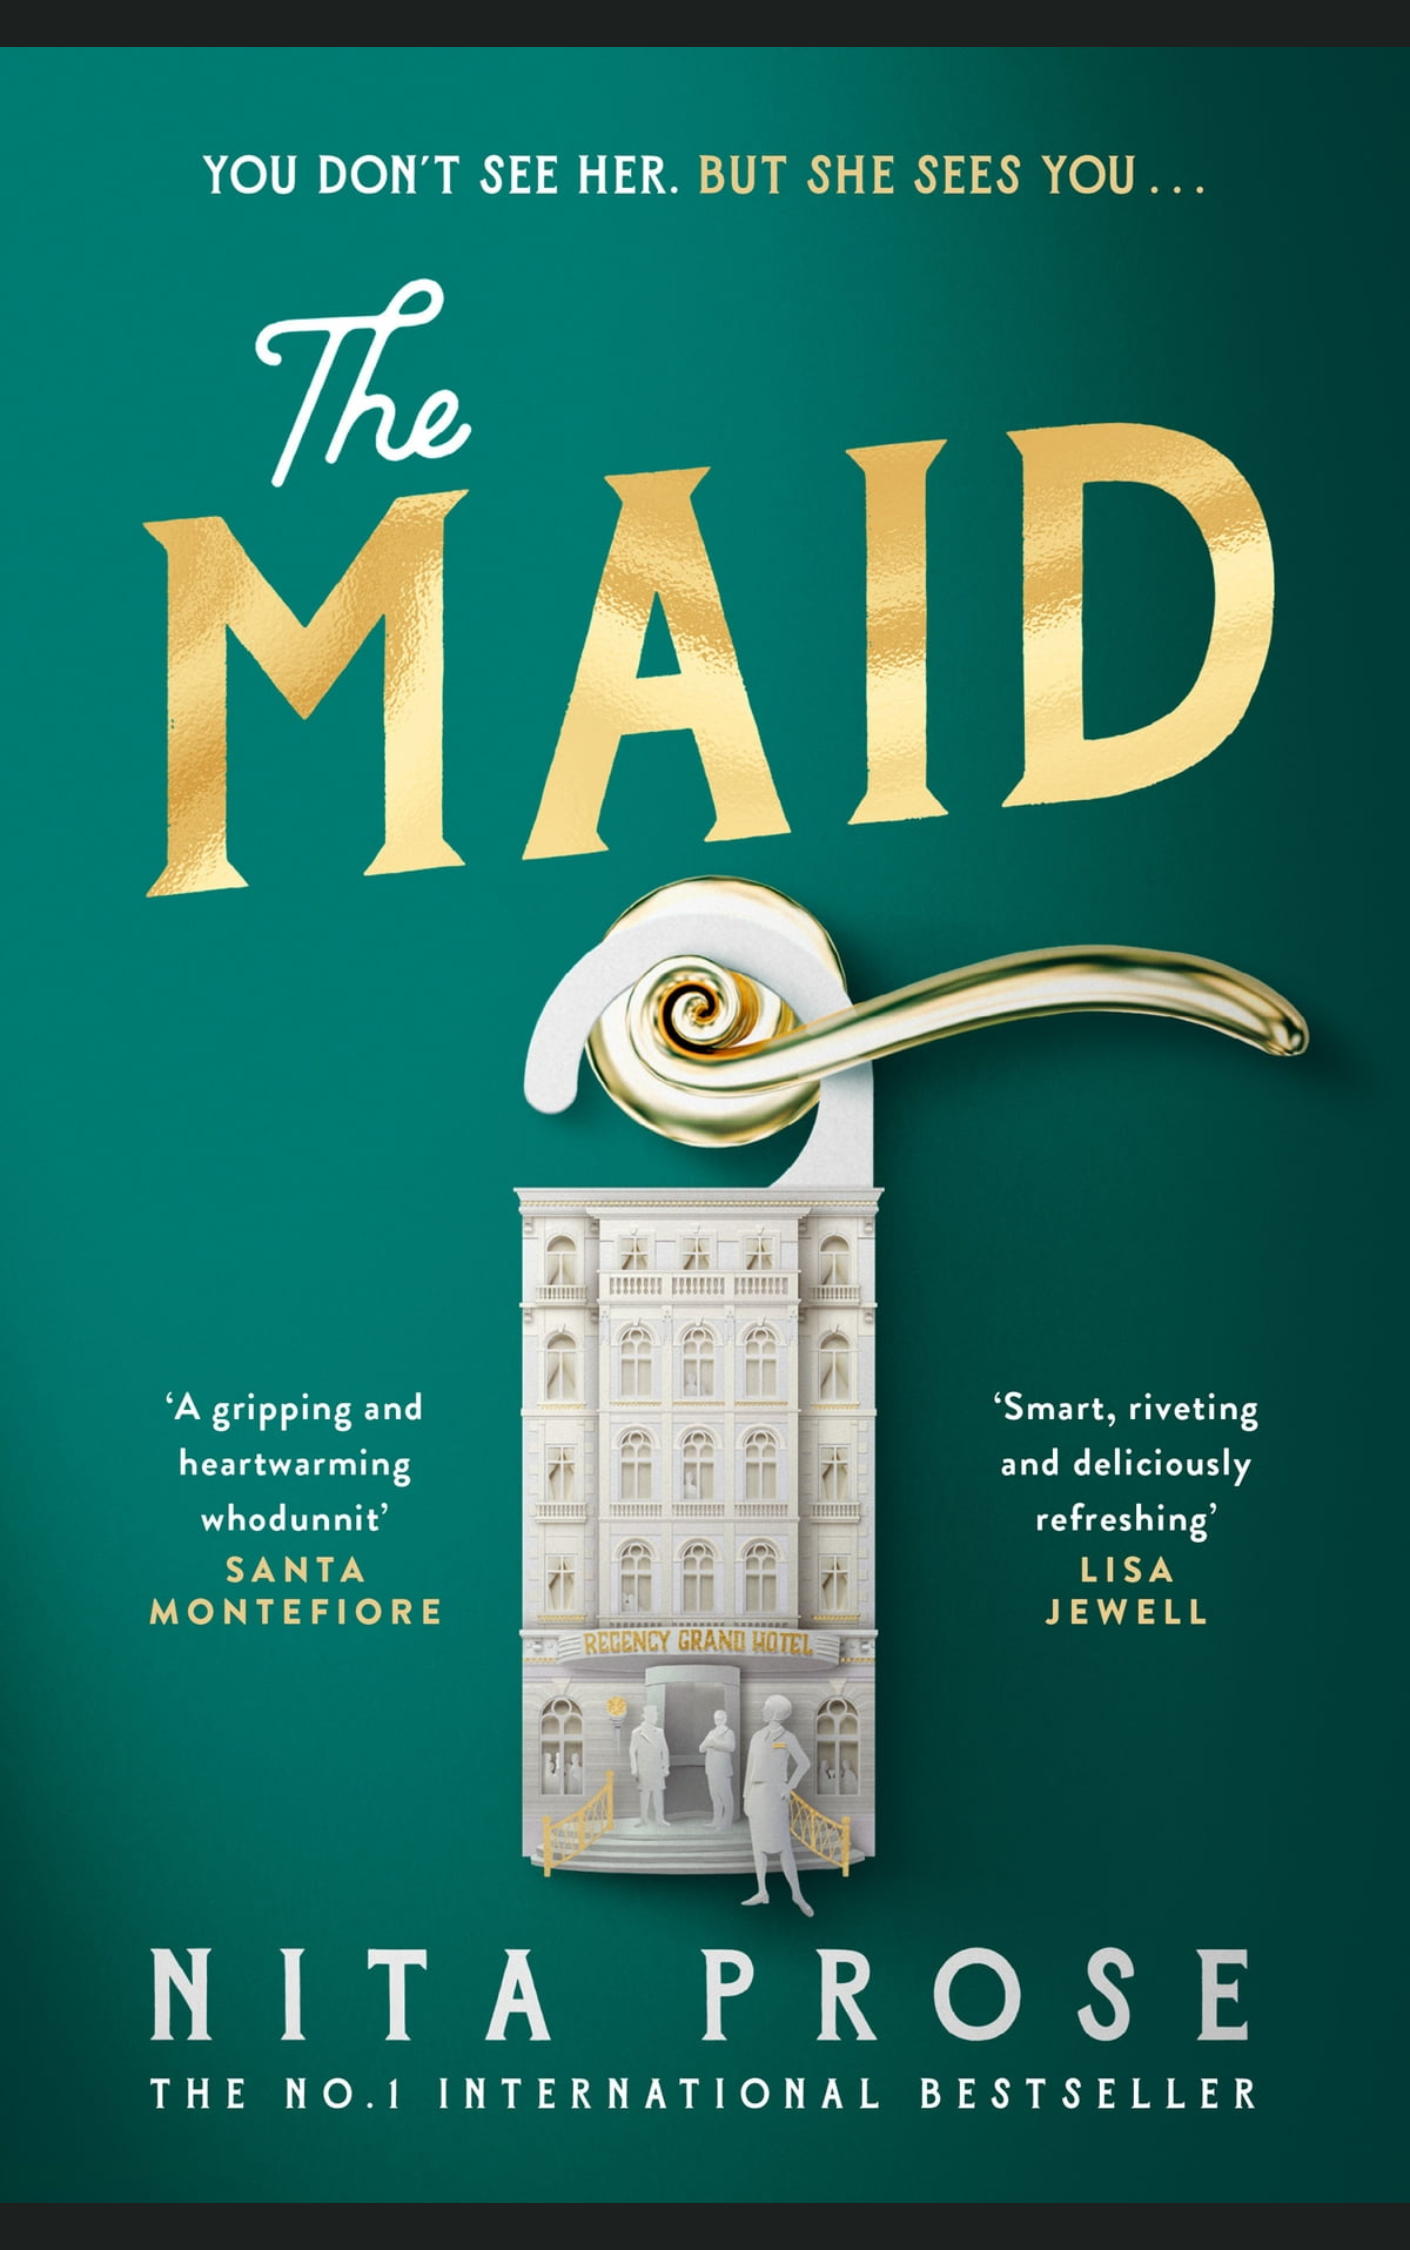 THE MAID (PAPERBACK) BY NITA PROSE